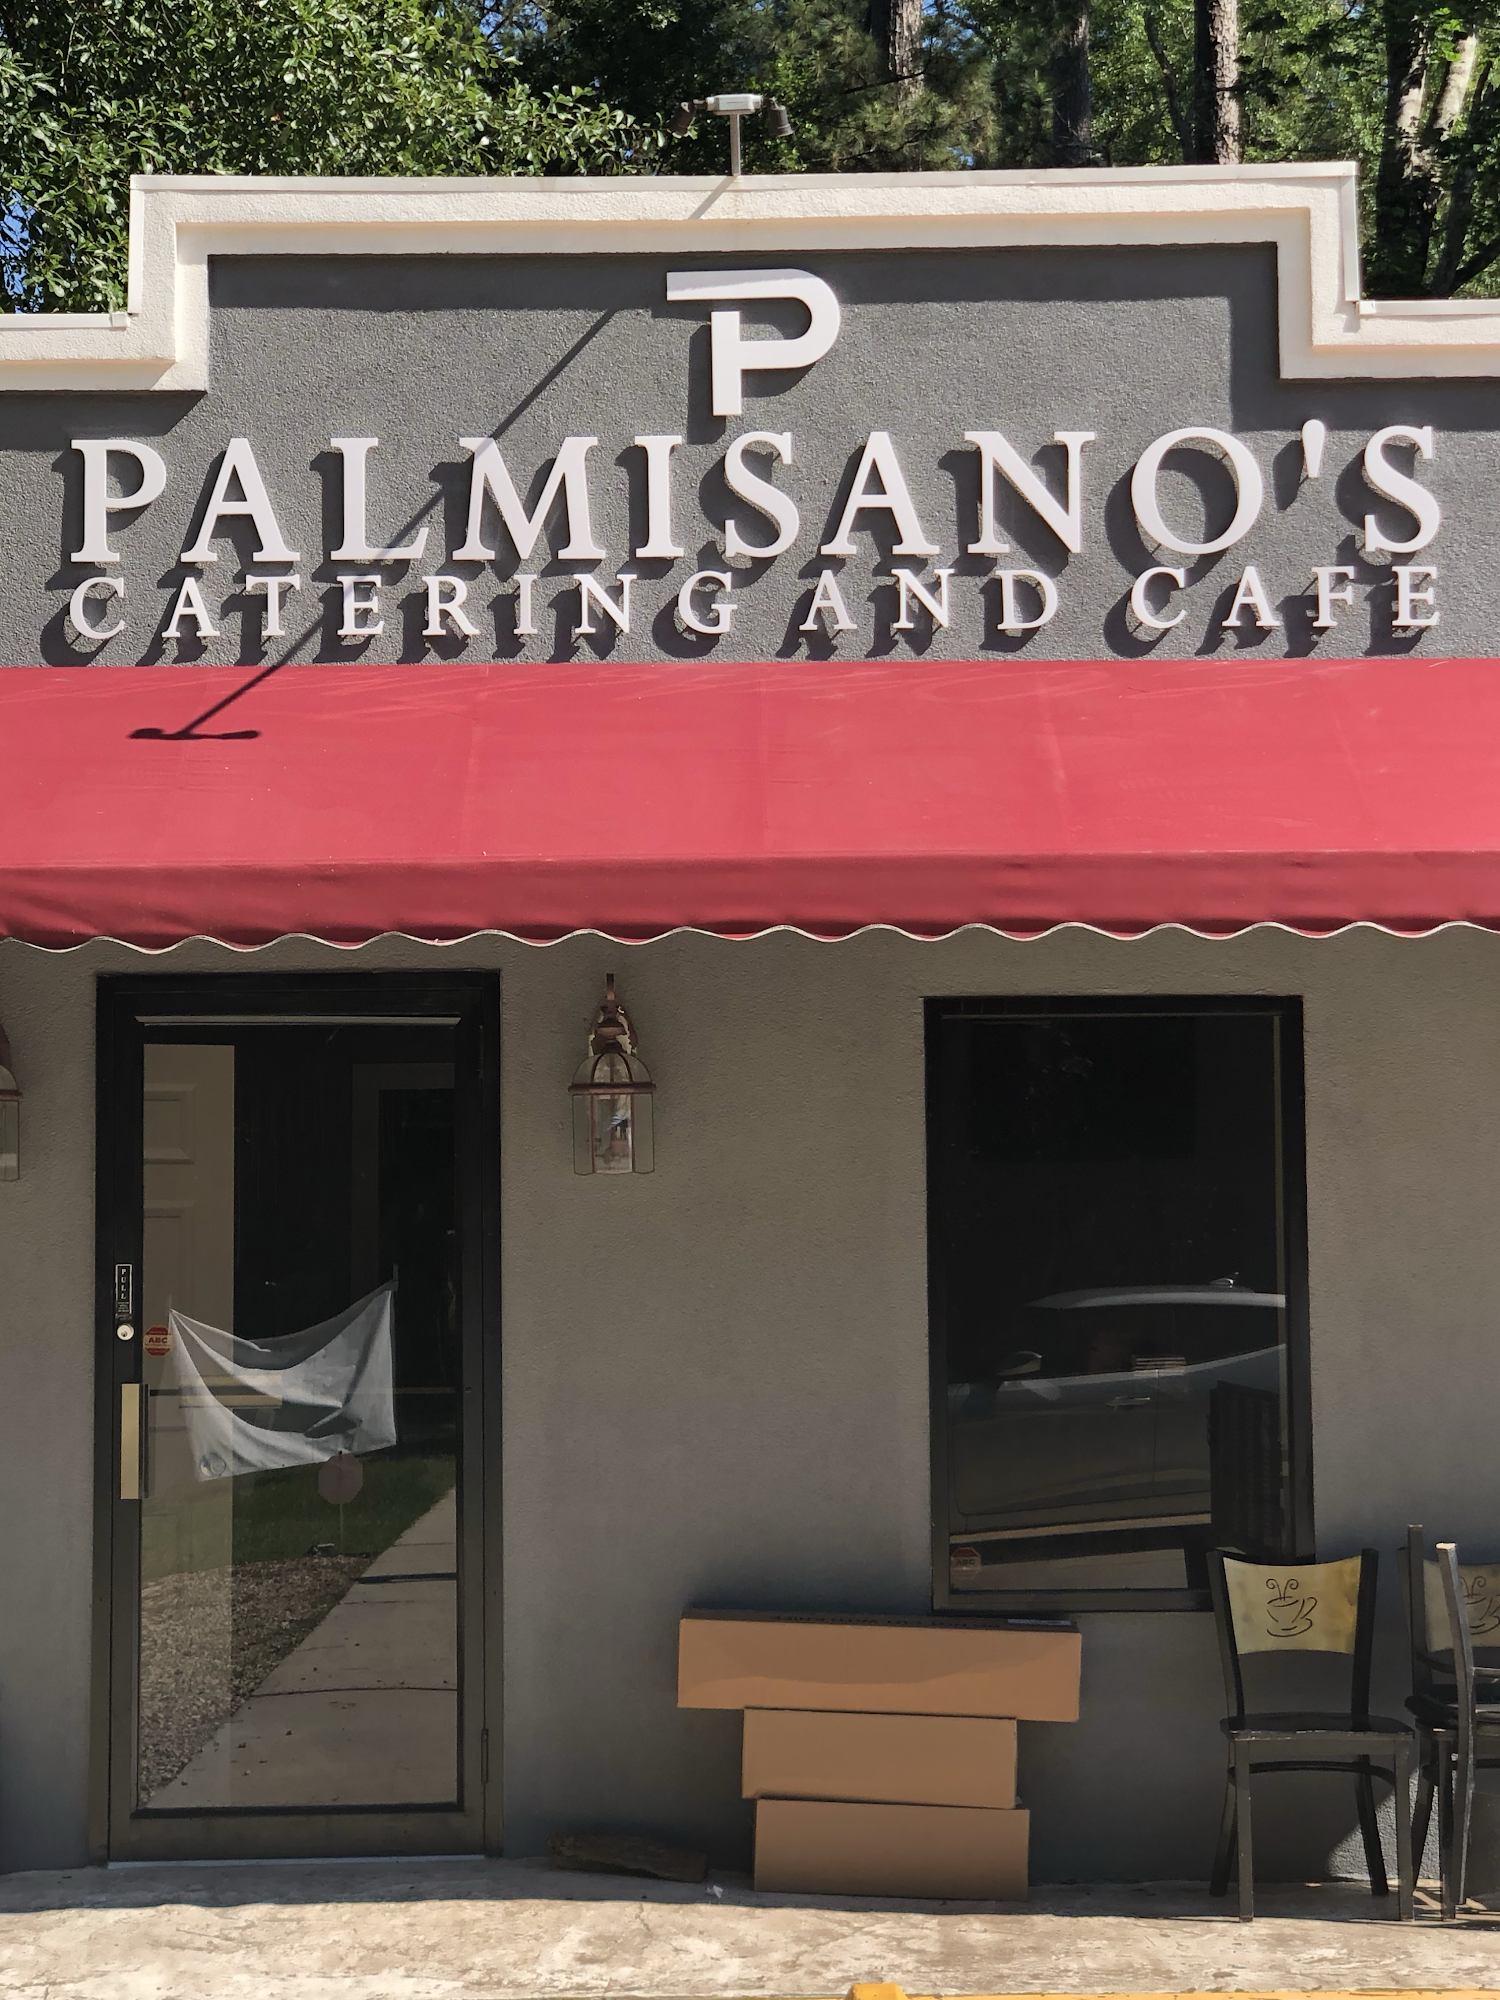 Palmisano's Catering and Cafe